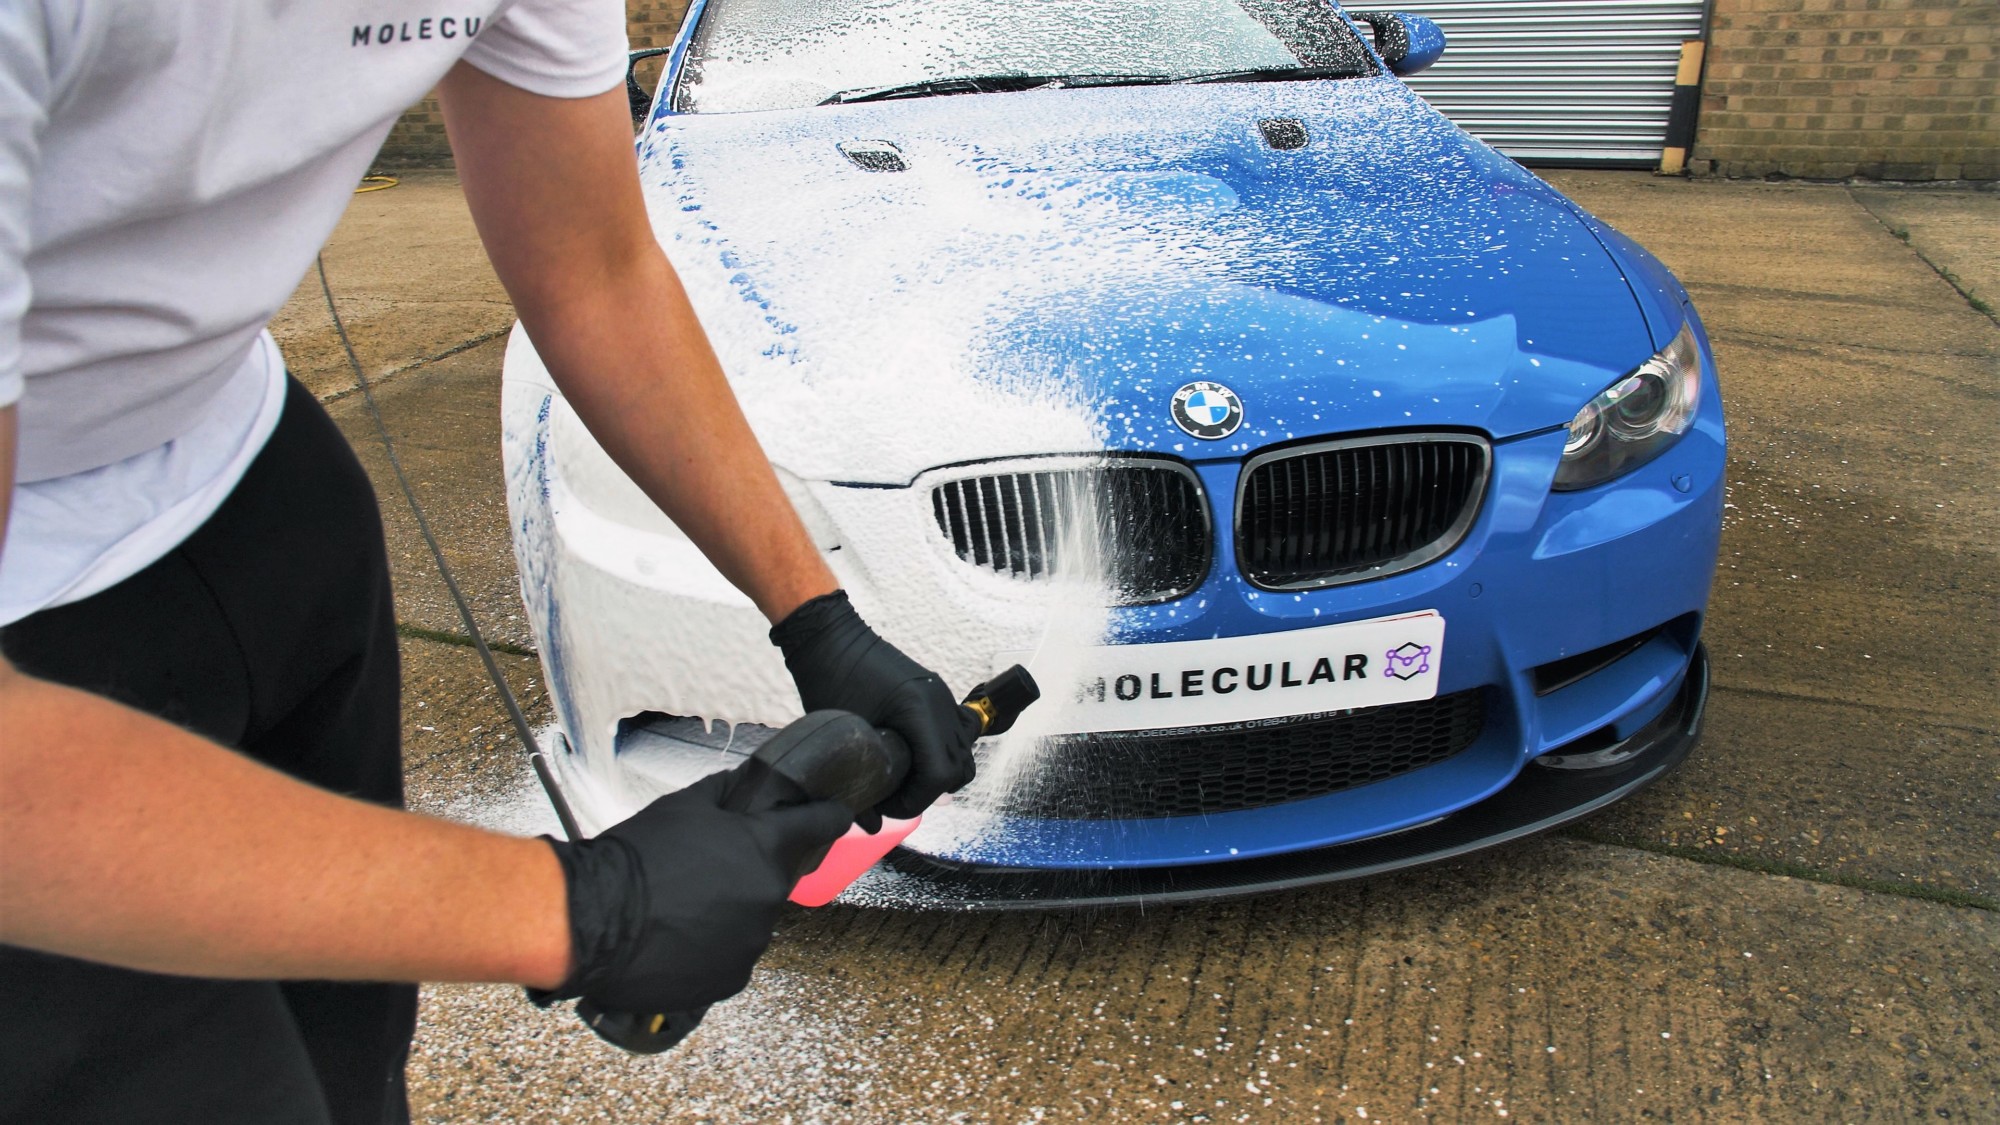 Car Valeting and Car Detailing - What's the Difference?